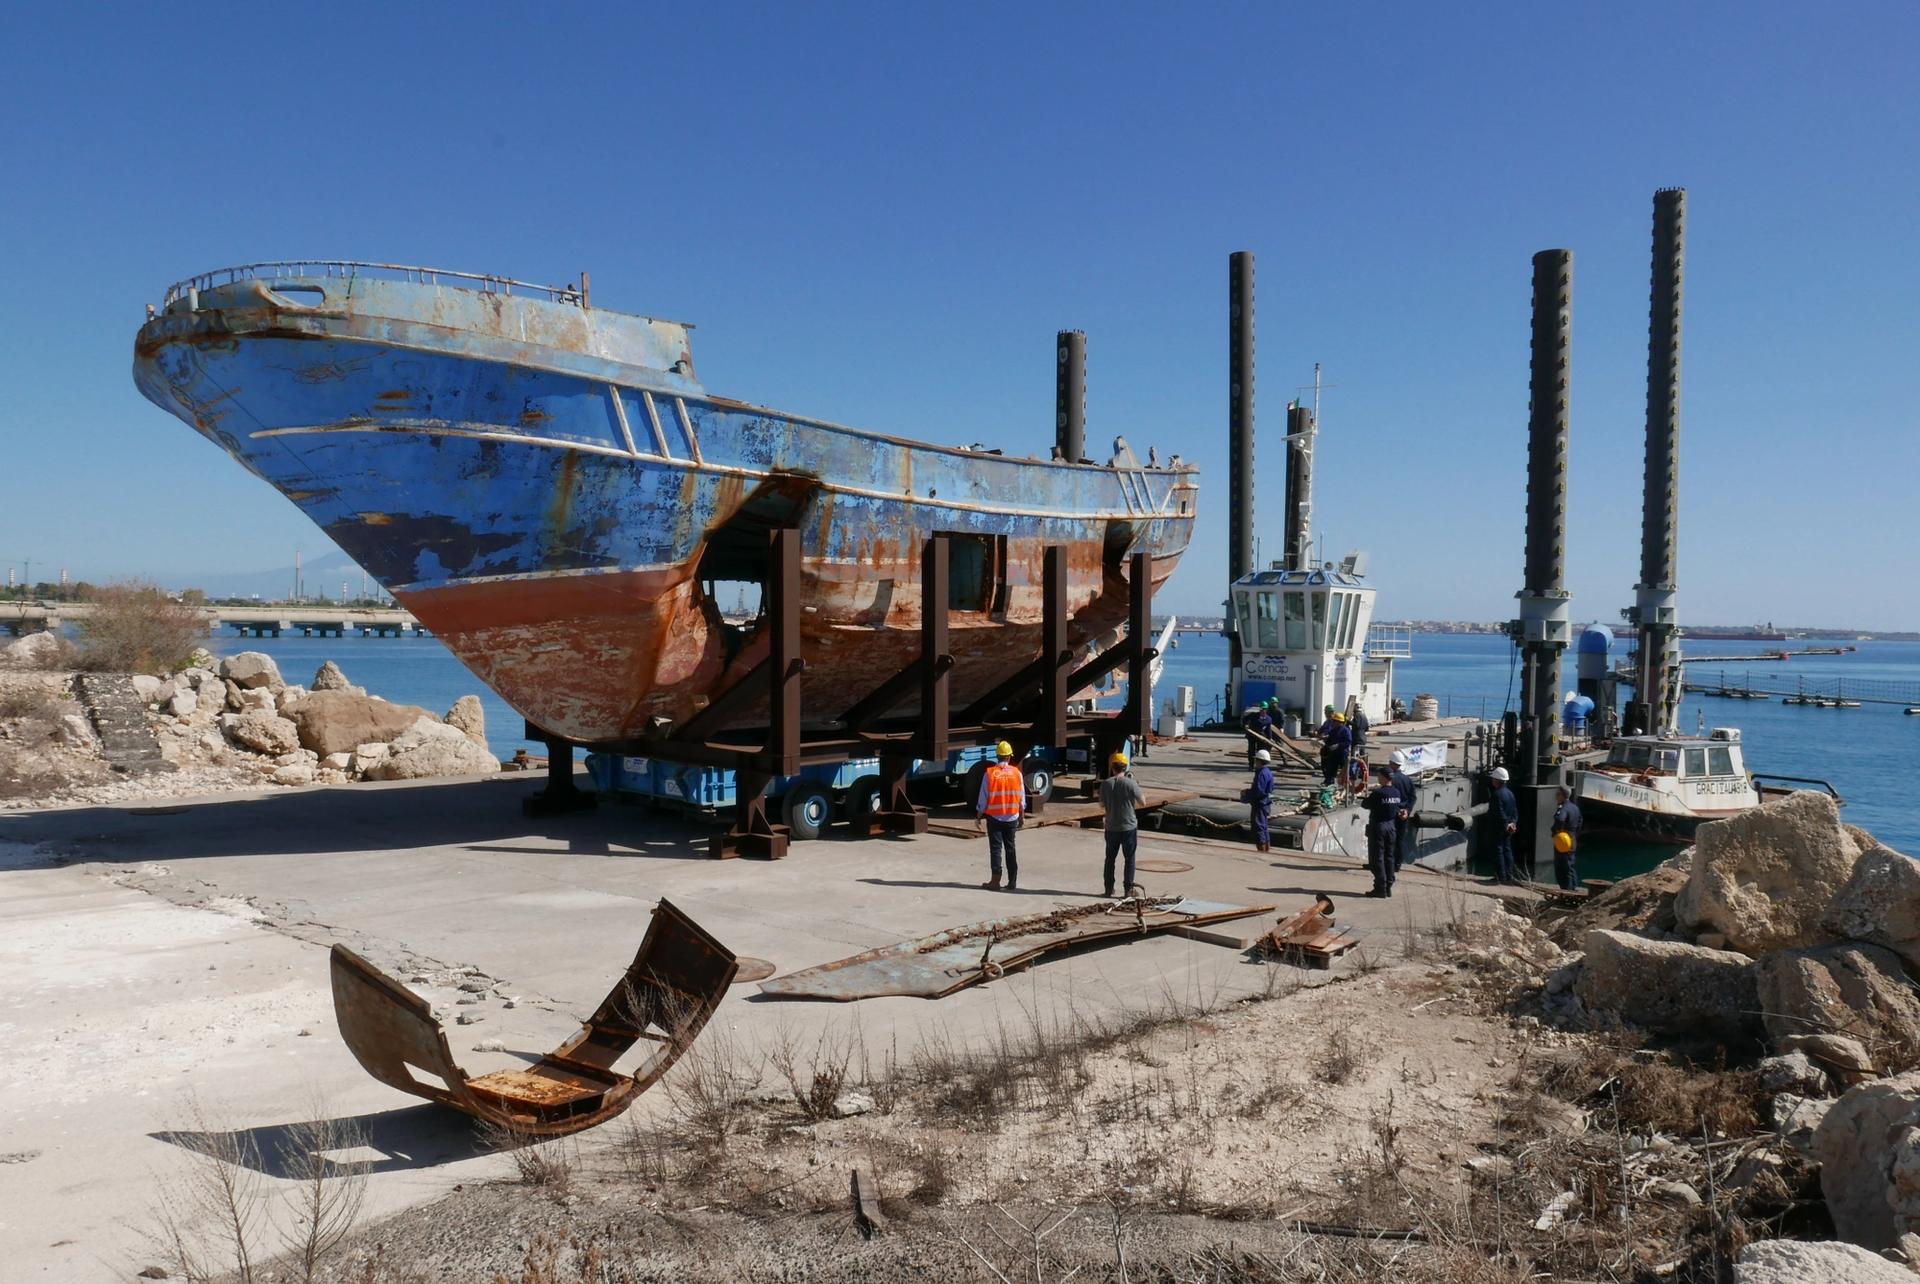 The shipwreck being transported from the Pontile Marina Militare di Melilli (NATO) to the Arsenale in Venice Courtesy of Barca Nostra